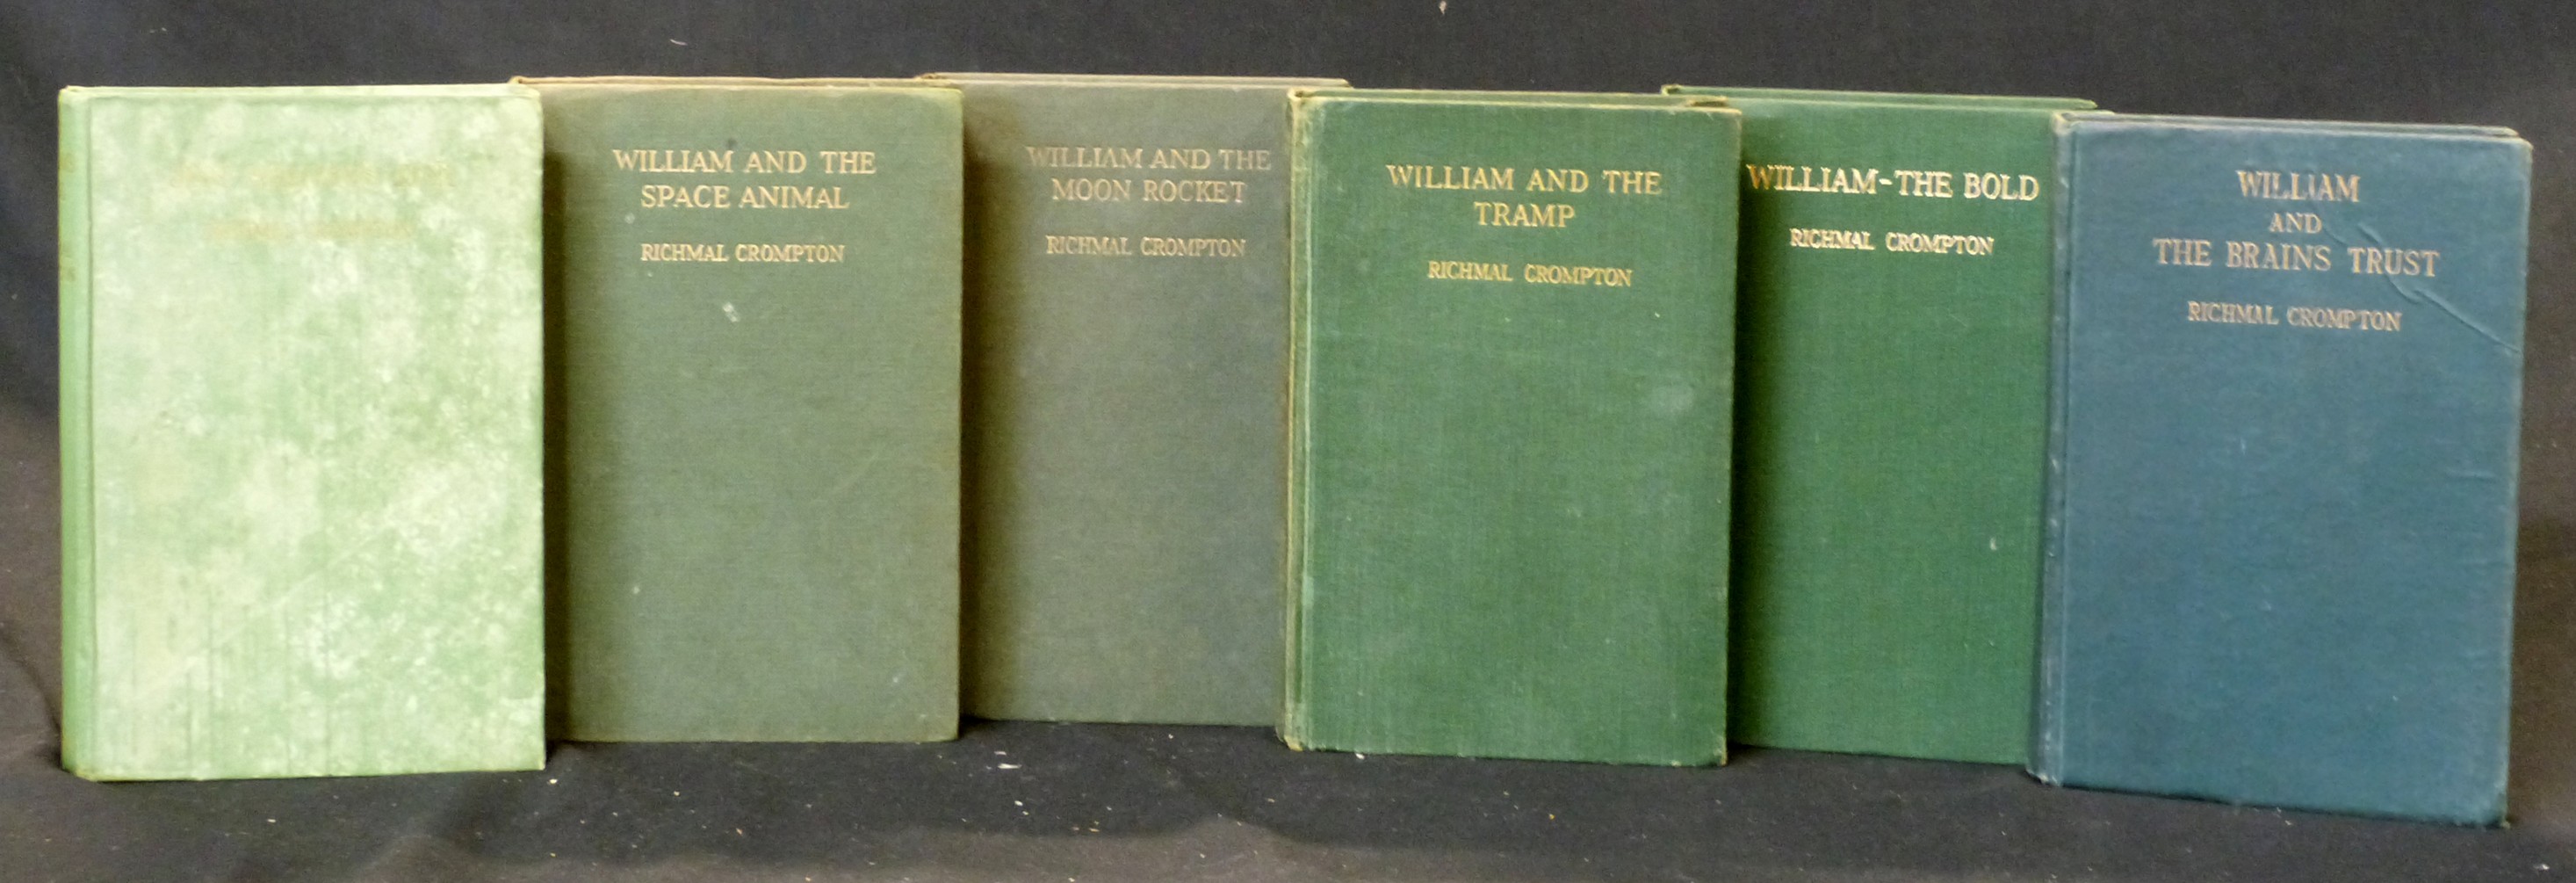 RICHMAL CROMPTON: 6 titles: WILLIAM AND THE BRAINS TRUST, London, George Newnes, 1945, 1st